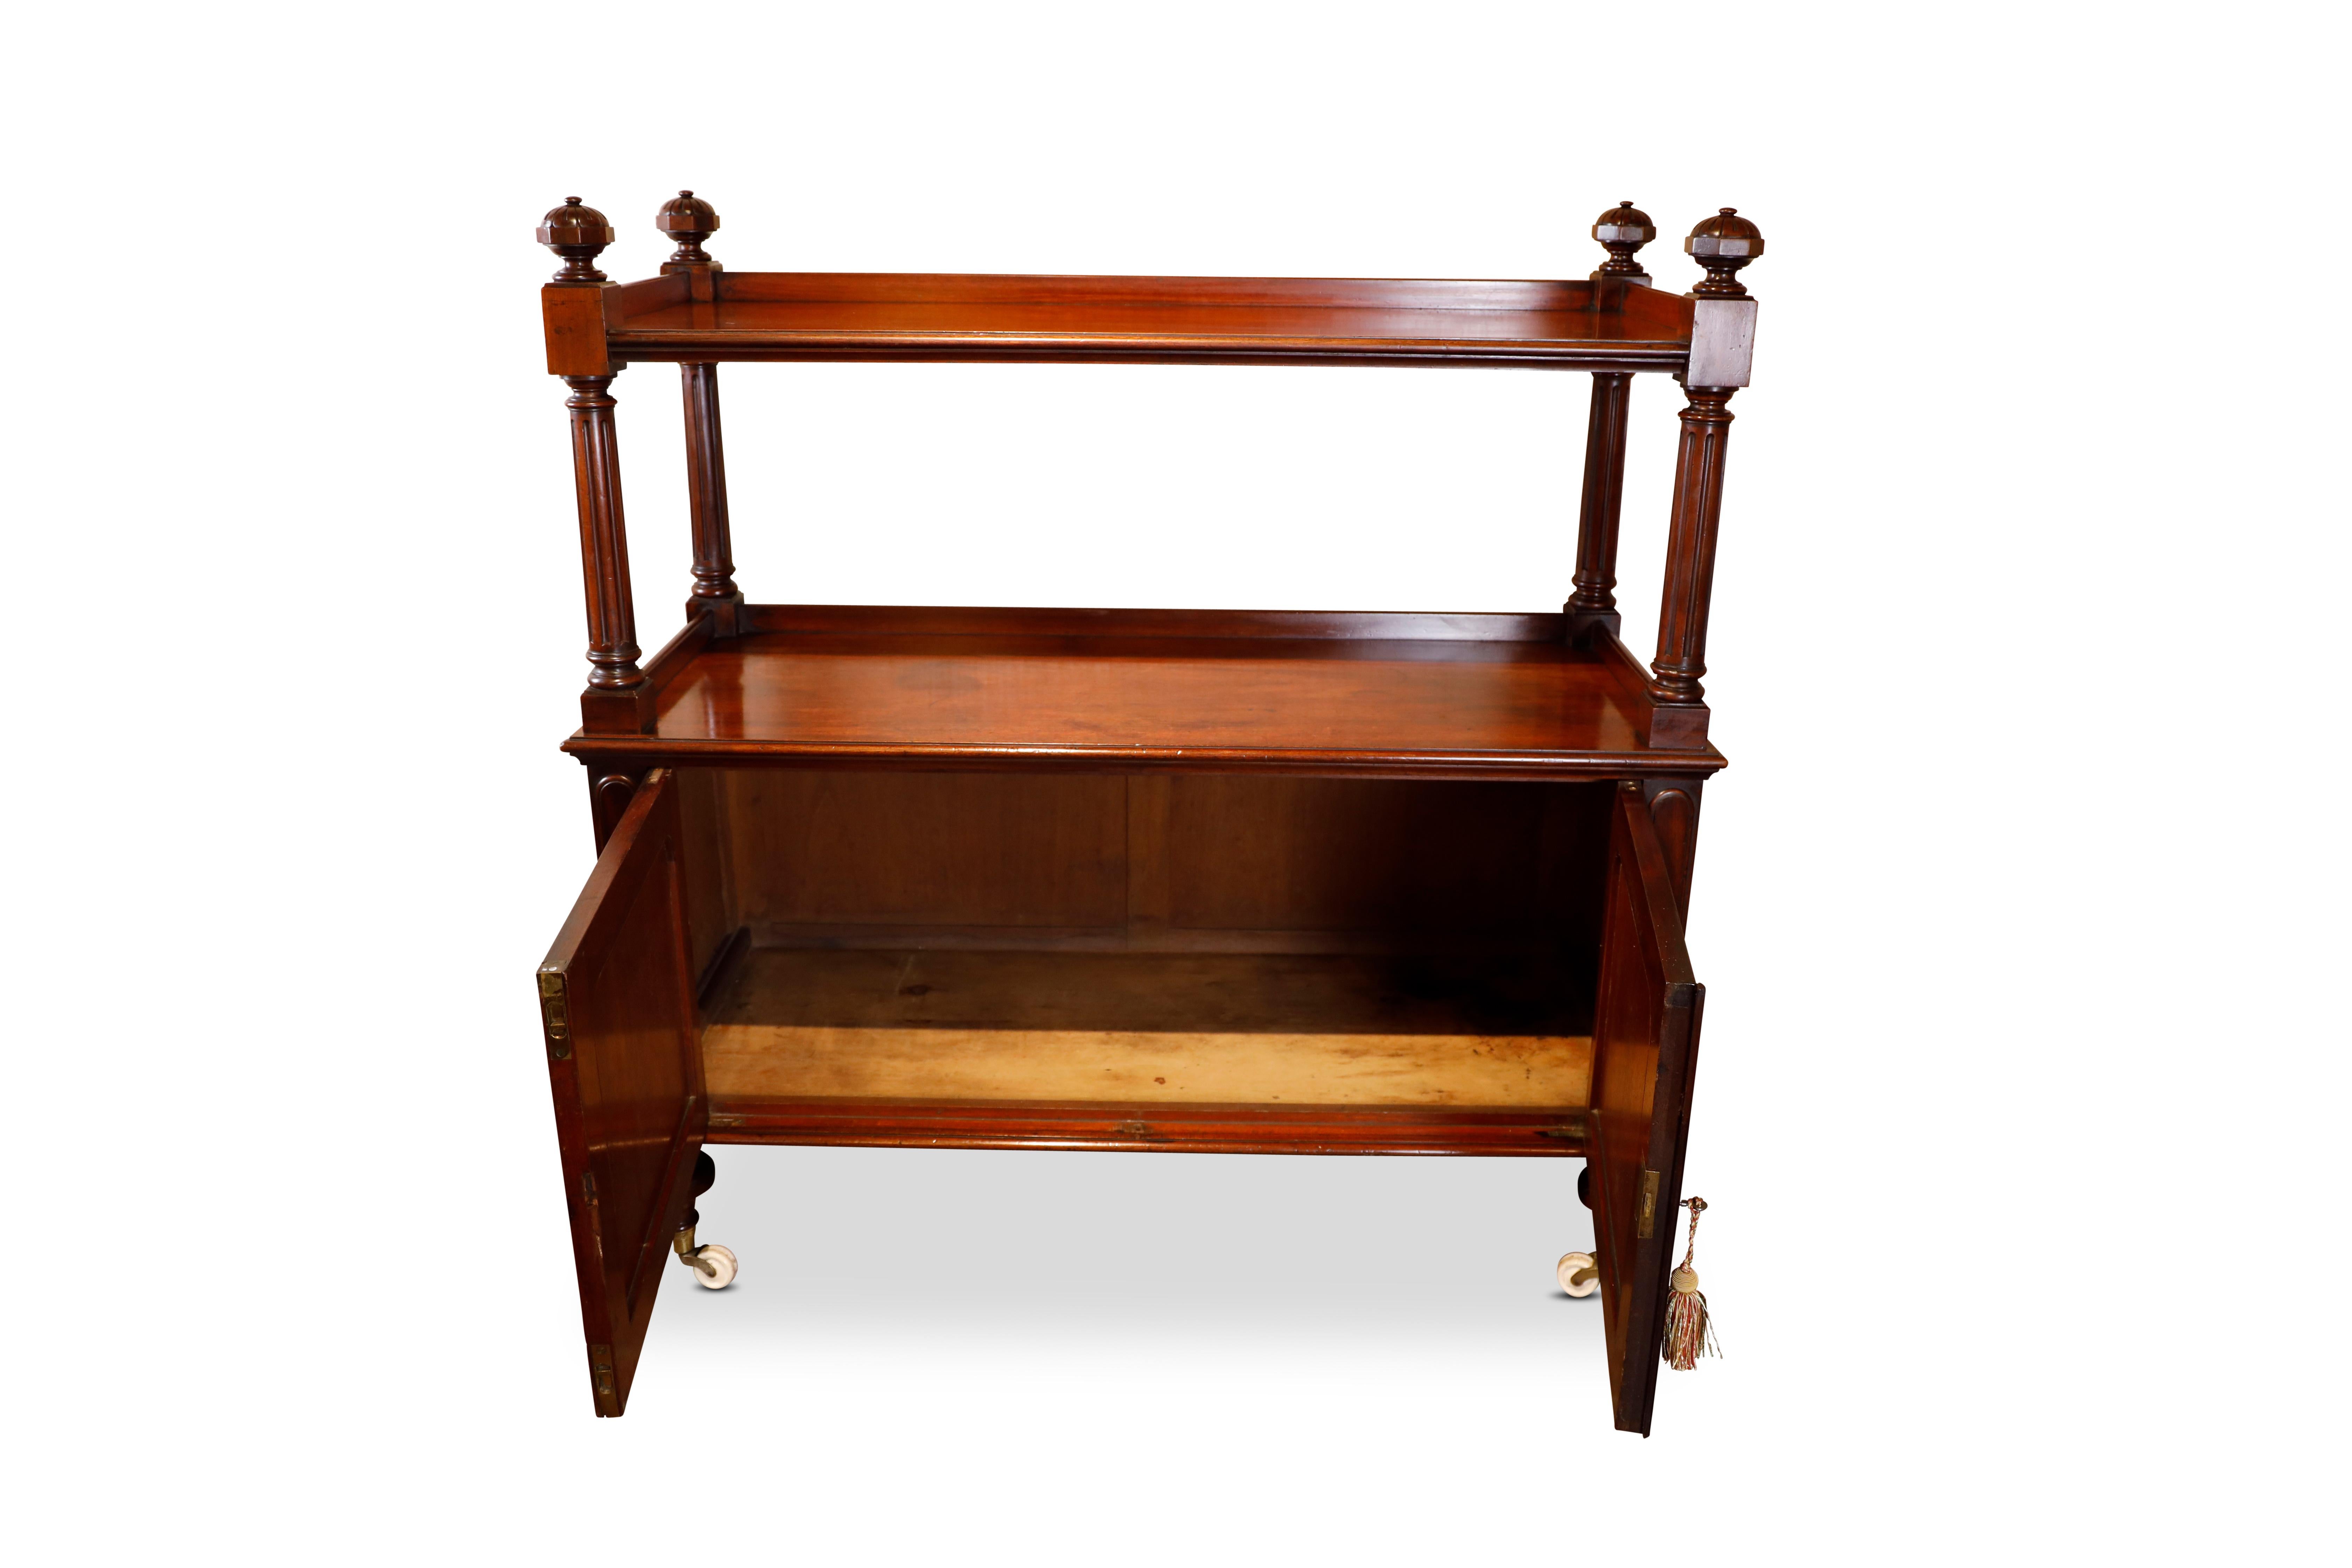 Victorian Mahogany Trolly / Dumbwaiter In Excellent Condition For Sale In Woodbury, CT